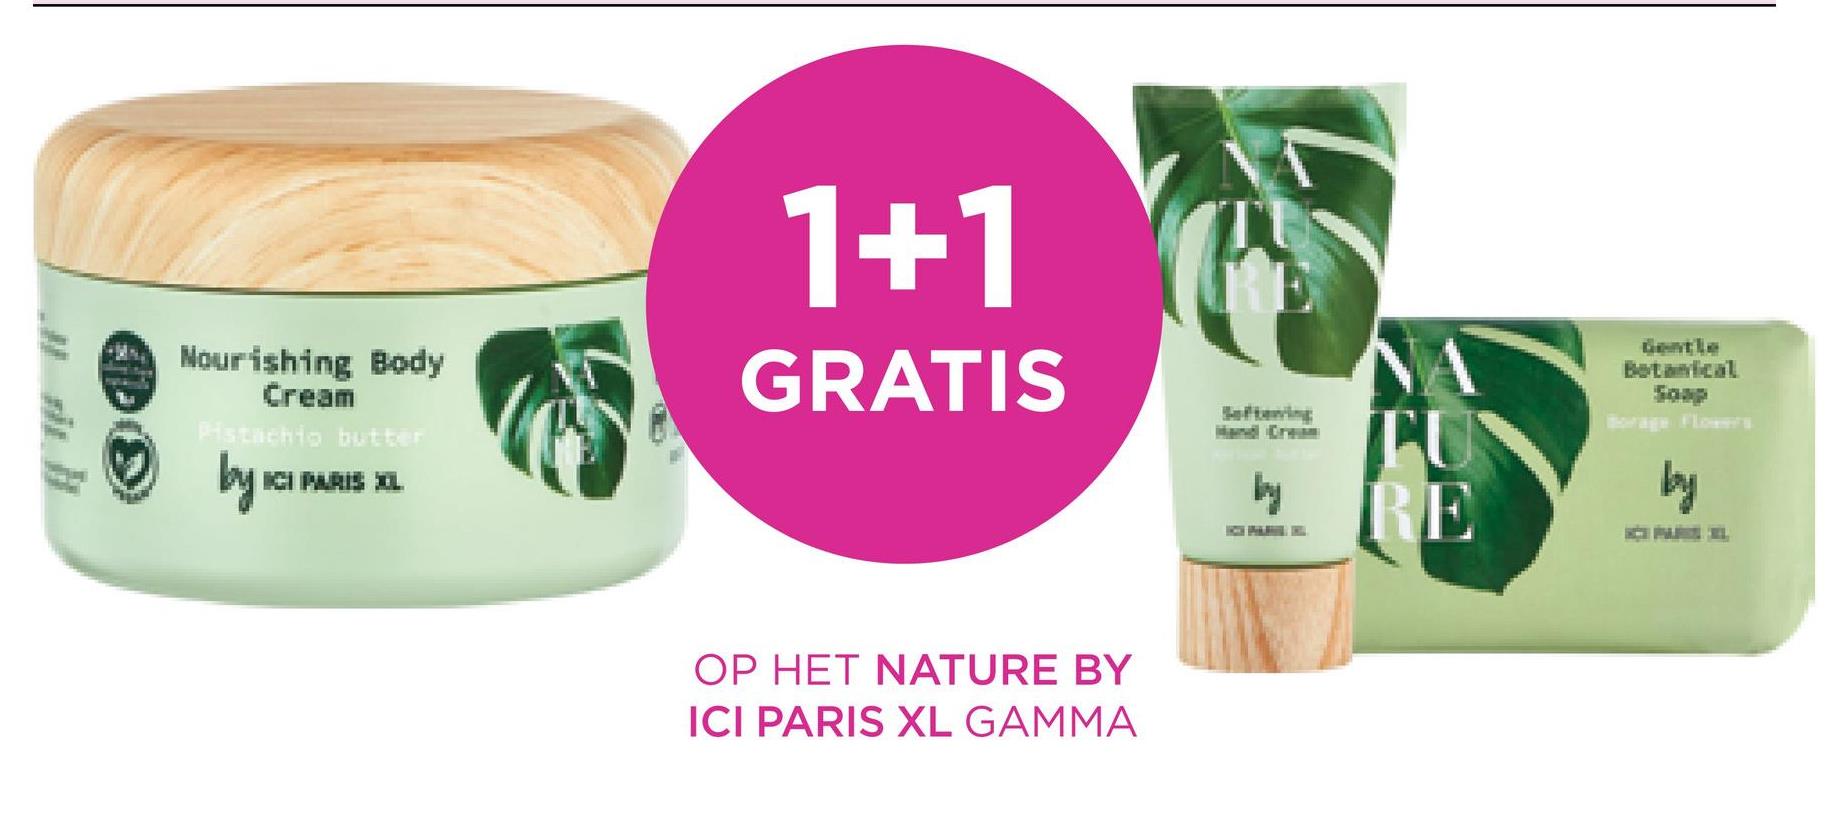 Nourishing Body
Cream
Pistachio butter
by ic
1+1
GRATIS
OP HET NATURE BY
ICI PARIS XL GAMMA
by
NA
TU
RE
by